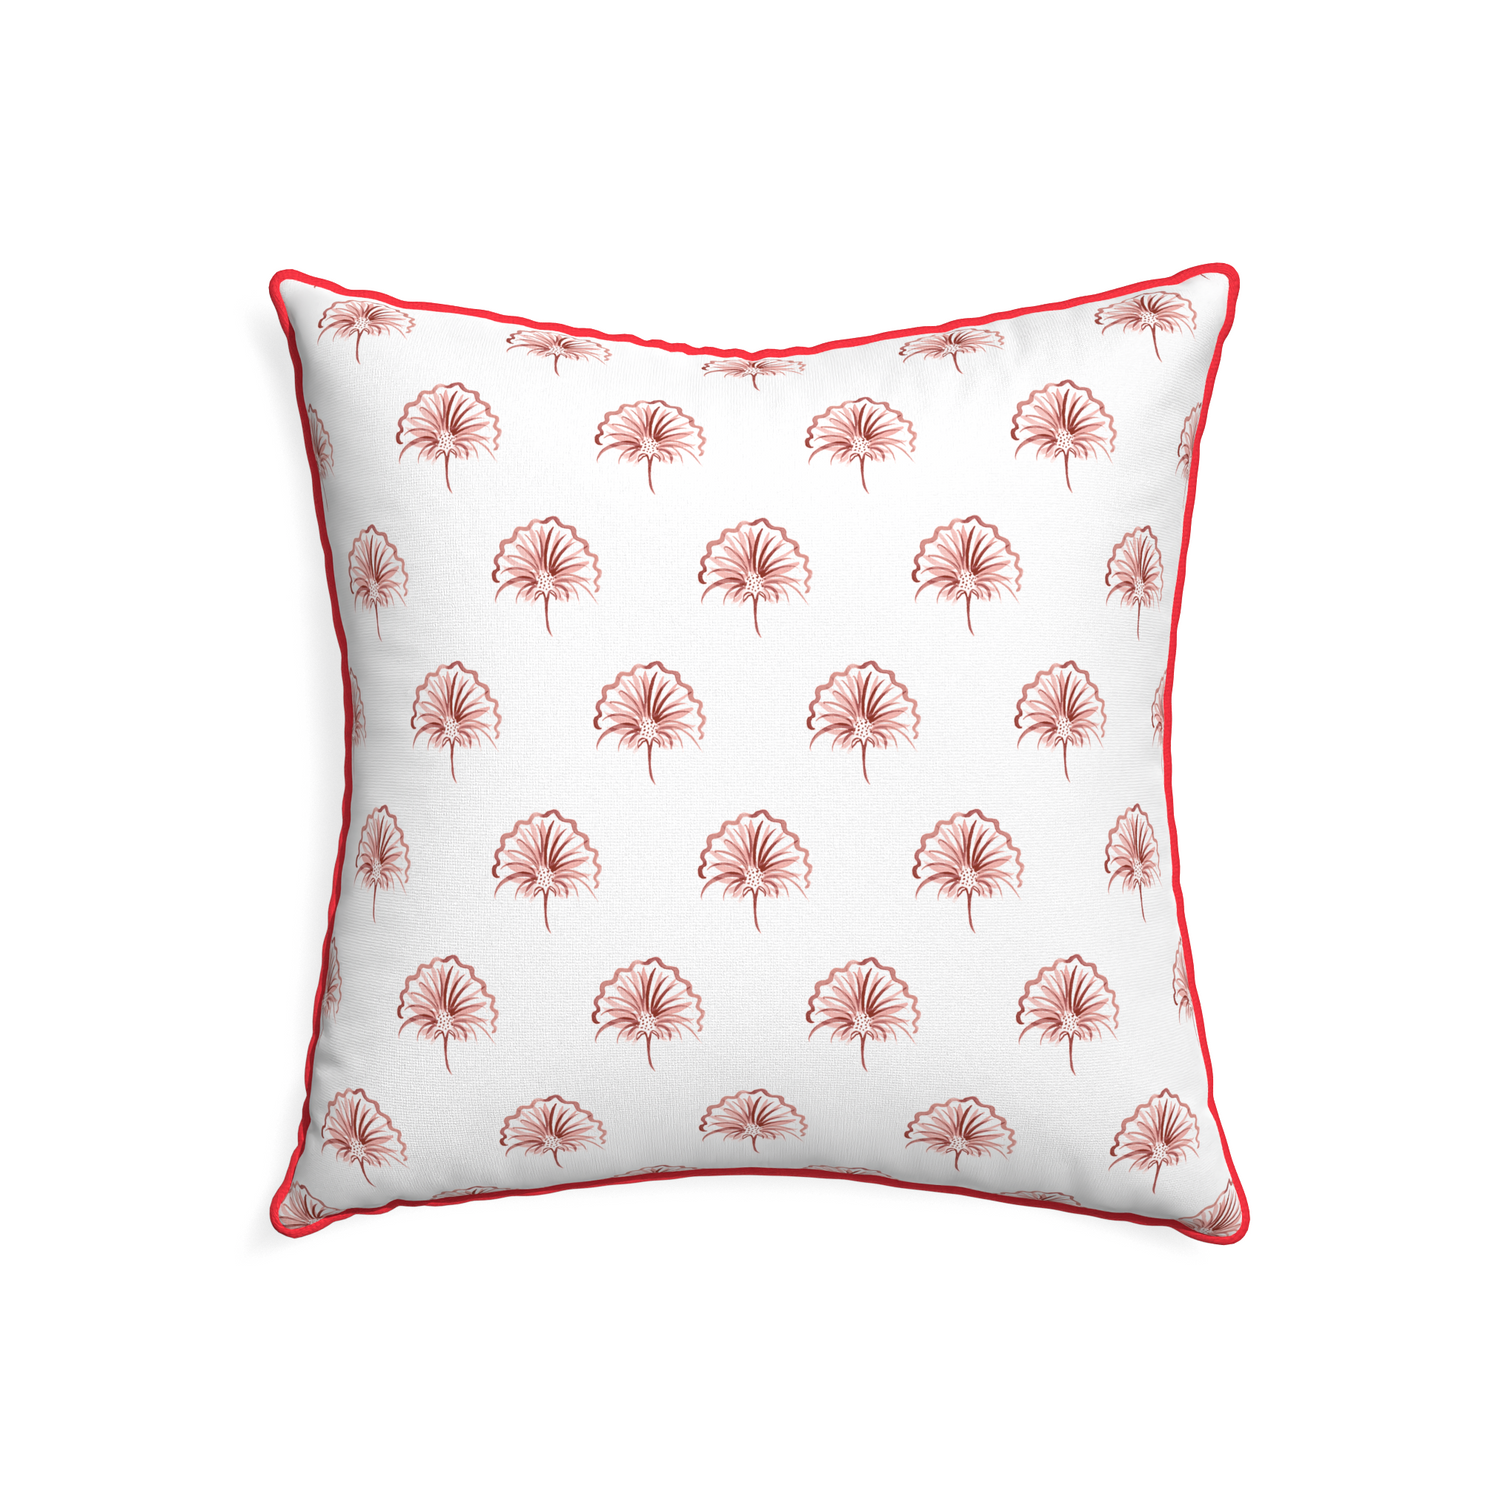 22-square penelope rose custom pillow with cherry piping on white background